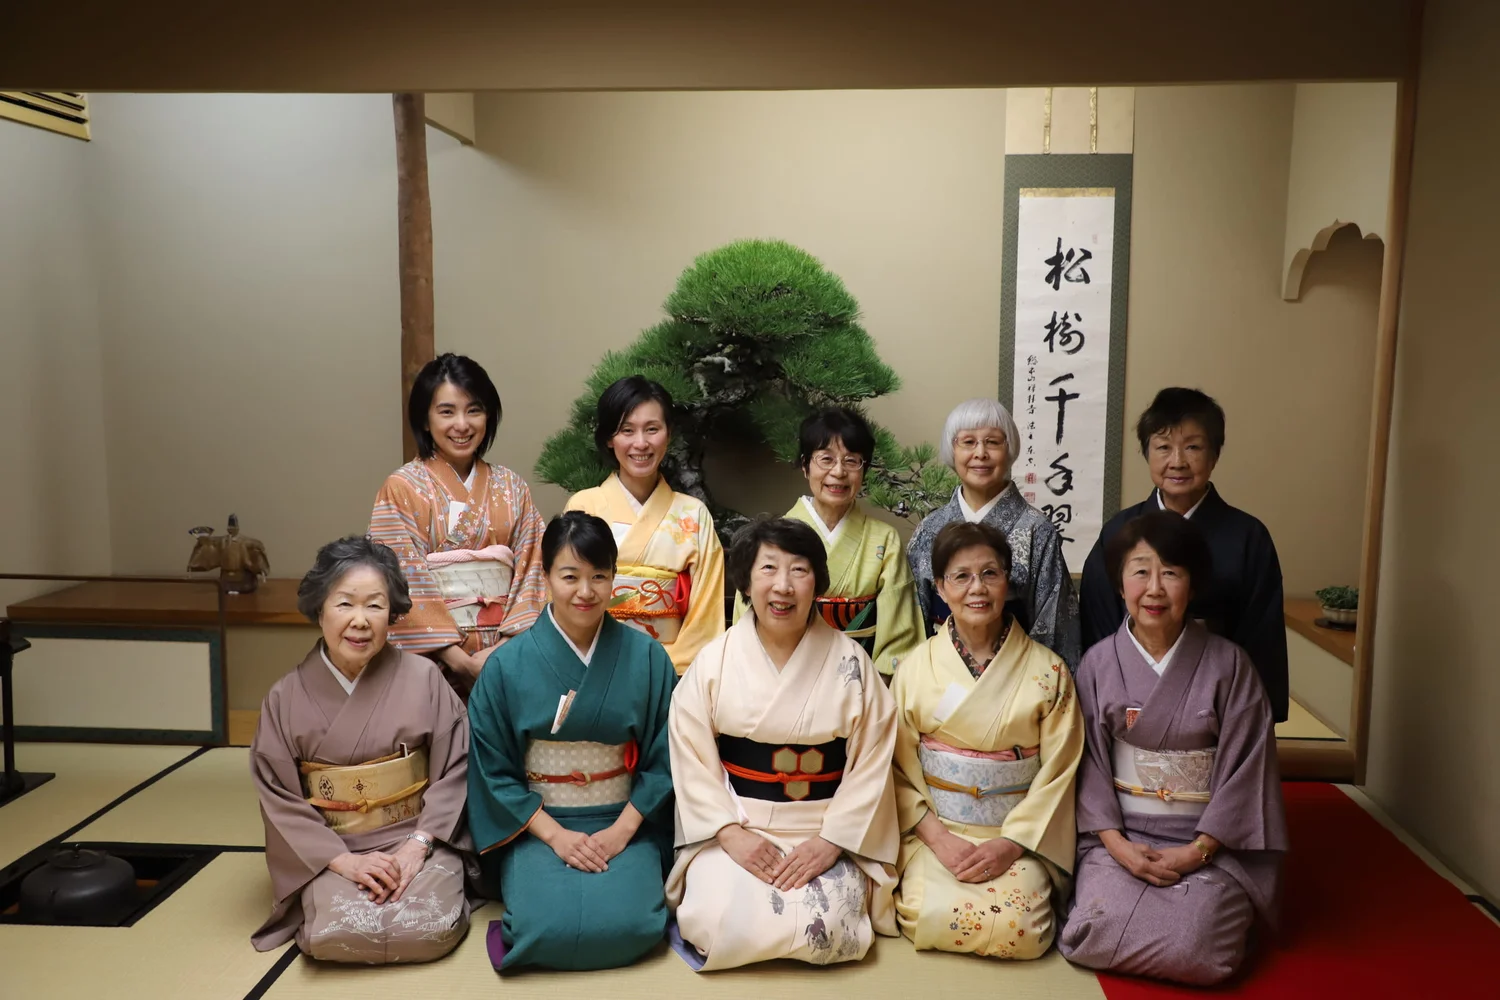 Wear a Kimono at a traditional house in the Bonsai Museum